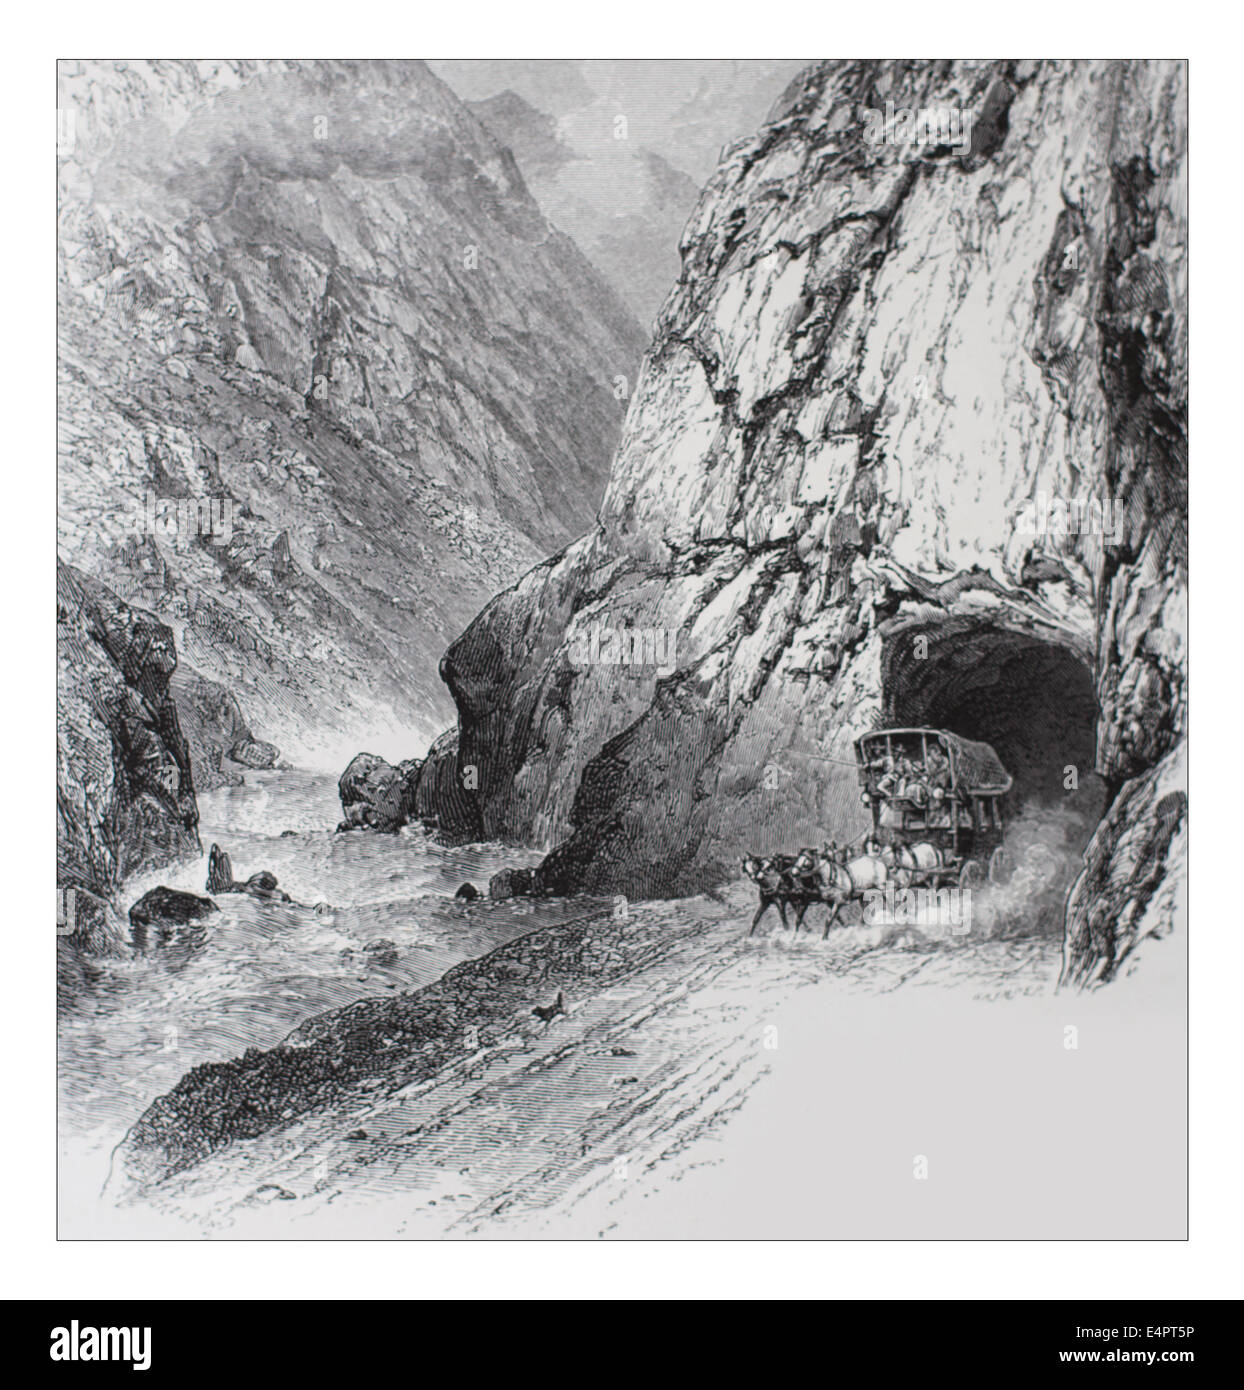 Tunnel on the St.Gothard Road, near Andermatt Illustration from 'The British isles - Cassell Petter & Galpin Part 8 Picturesque Europe. Picturesque Europe was an illustrated set of Magazines published by Cassell, Petter, Galpin & Co. of London, Paris and New York in 1877. The publications depicted tourist haunts in Europe, with text descriptions and steel and wood engravings by eminent artists of the time, such as Harry Fenn, William H J Boot, Thomas C. L. Rowbotham, Henry T. Green , Myles B. Foster, John Mogford , David H. McKewan, William L. Leitch, Edmund M. Wimperis and Joseph B. Smith. Stock Photo